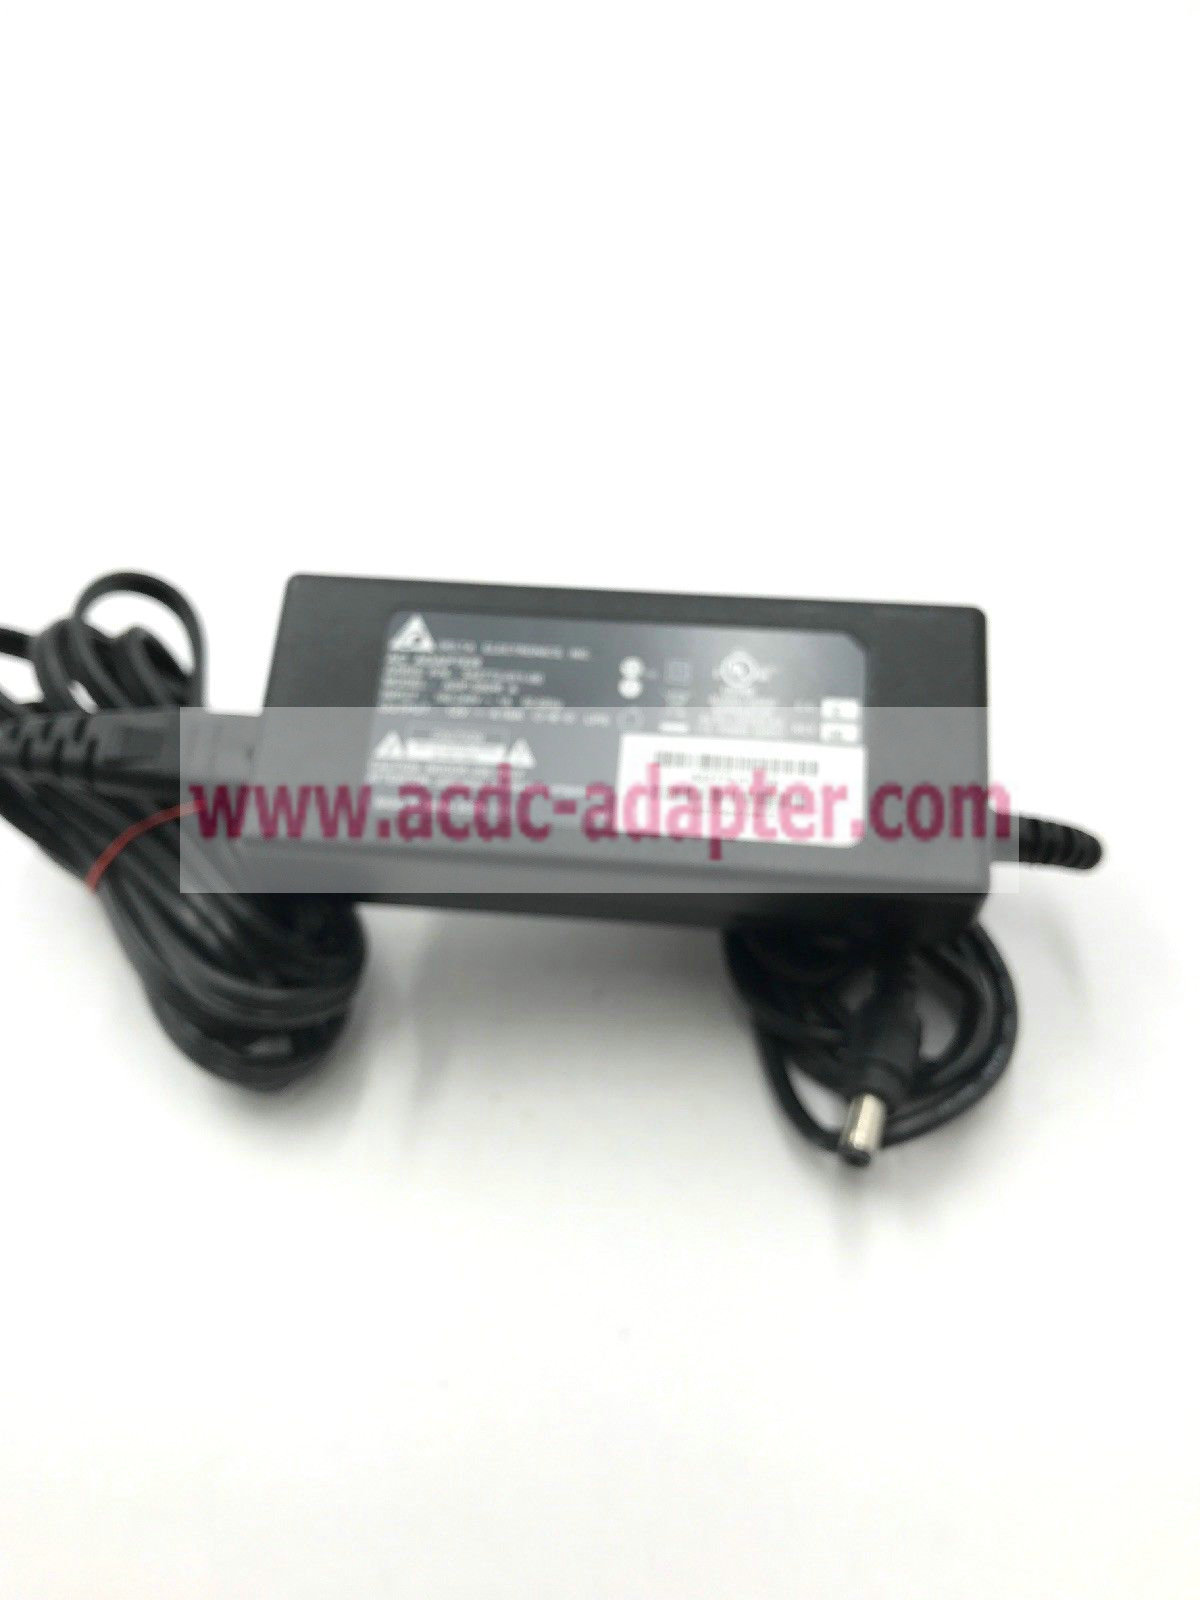 NEW Delta 542772-011-00 ADP-50DR A 12v 4.16a ac adapter power supply - Click Image to Close